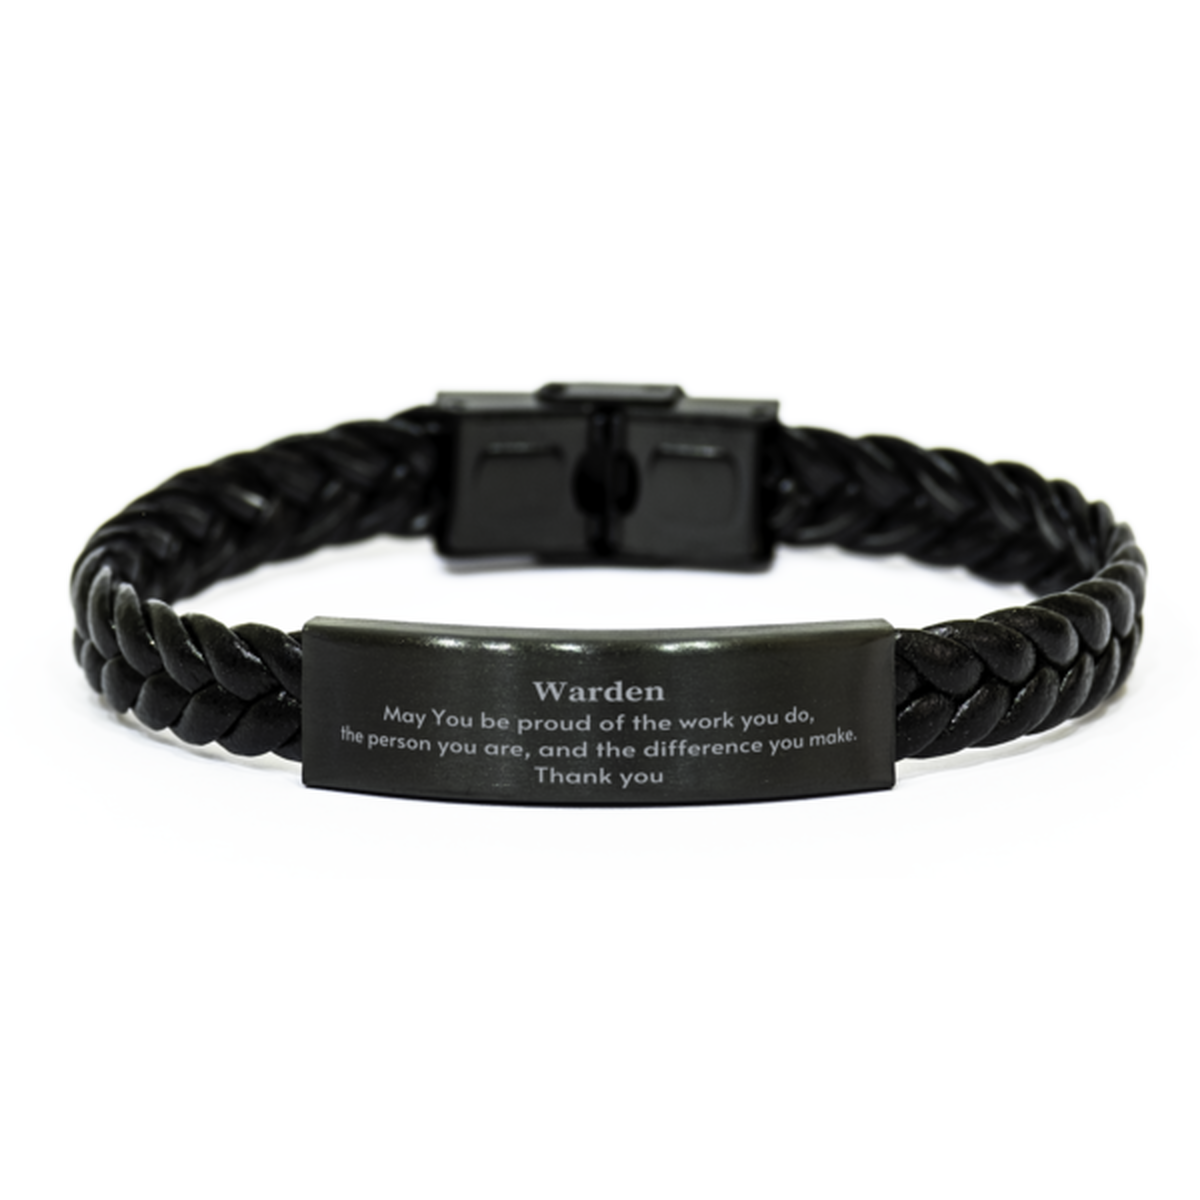 Heartwarming Braided Leather Bracelet Retirement Coworkers Gifts for Warden, Warden May You be proud of the work you do, the person you are Gifts for Boss Men Women Friends